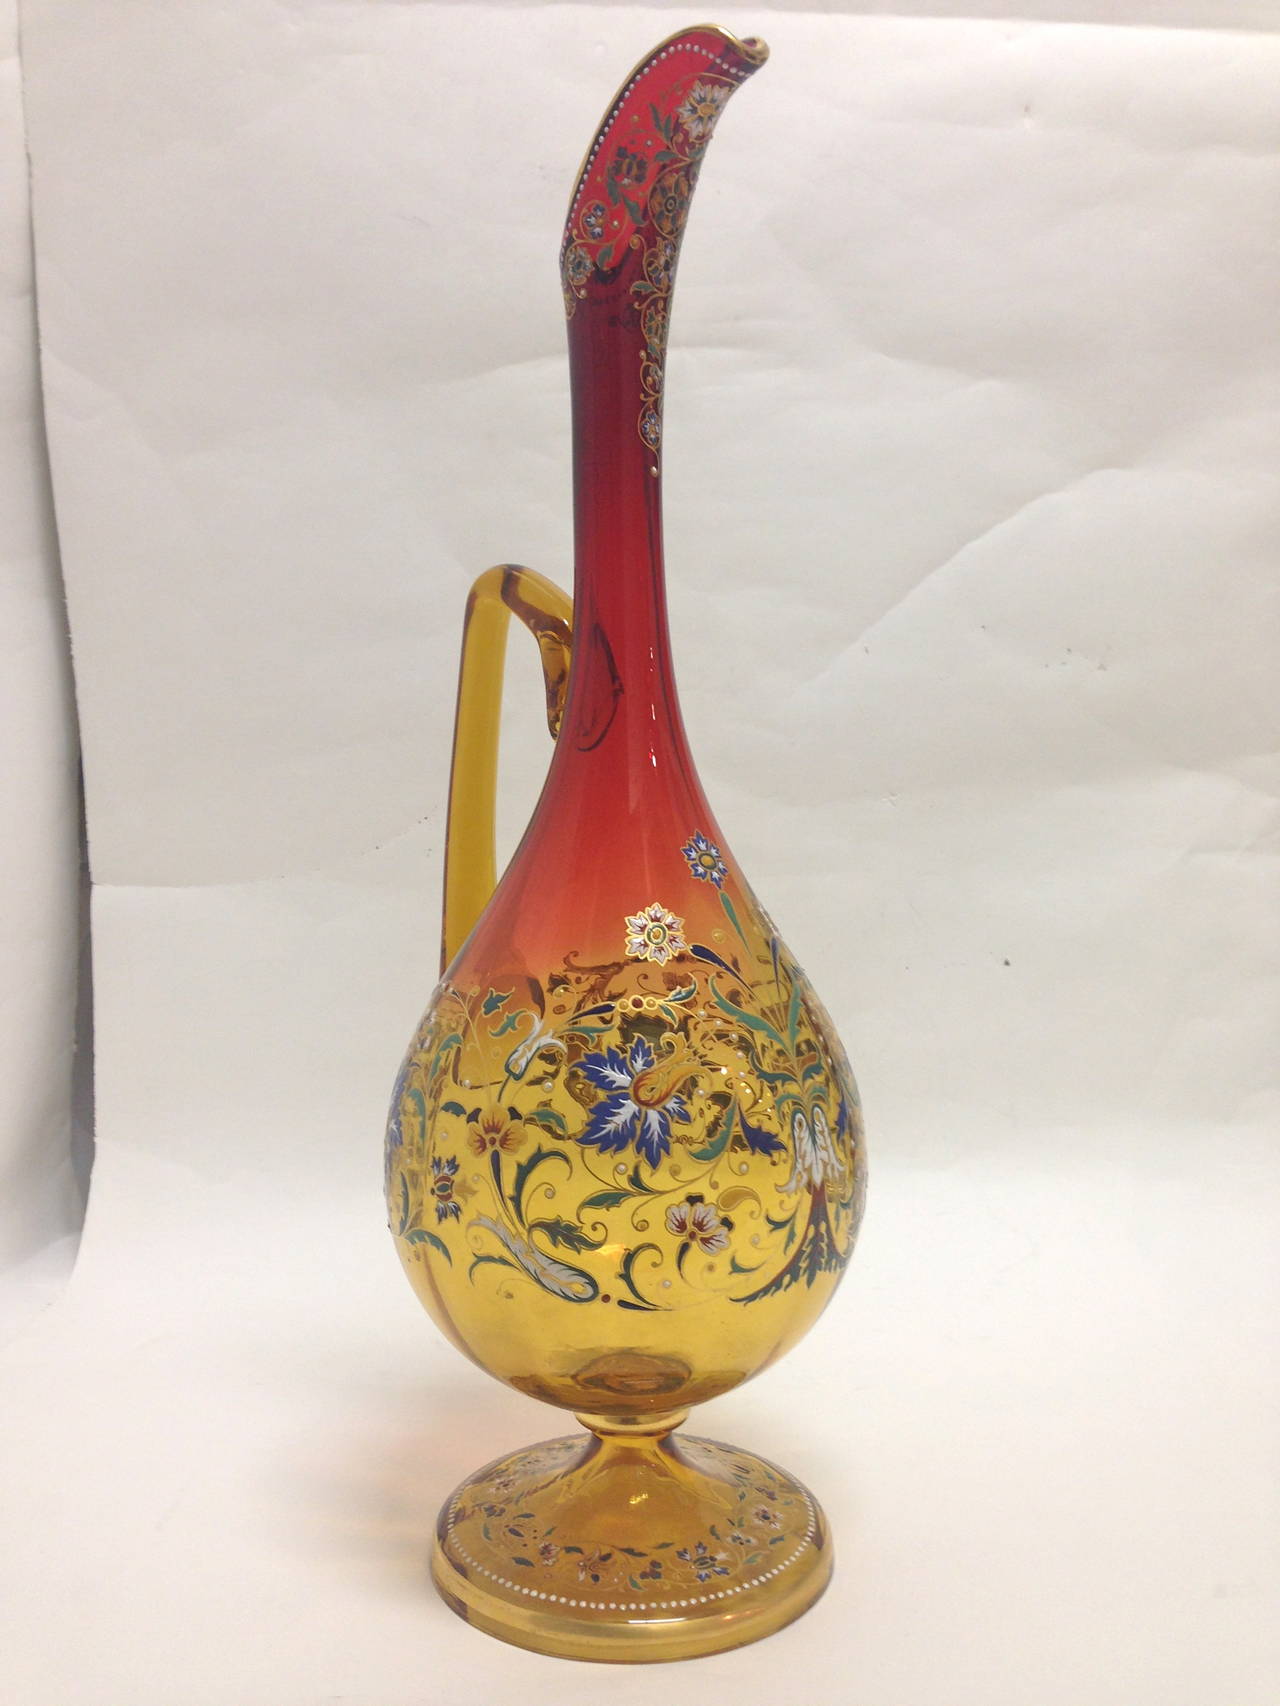 This fantastic Moser amberina exhibition Ewer is not only of large-scale but it is also extremely well executed. The enameling is expertly painted and gilded the design showing restraint but very strong, love the work at the spout and the color of